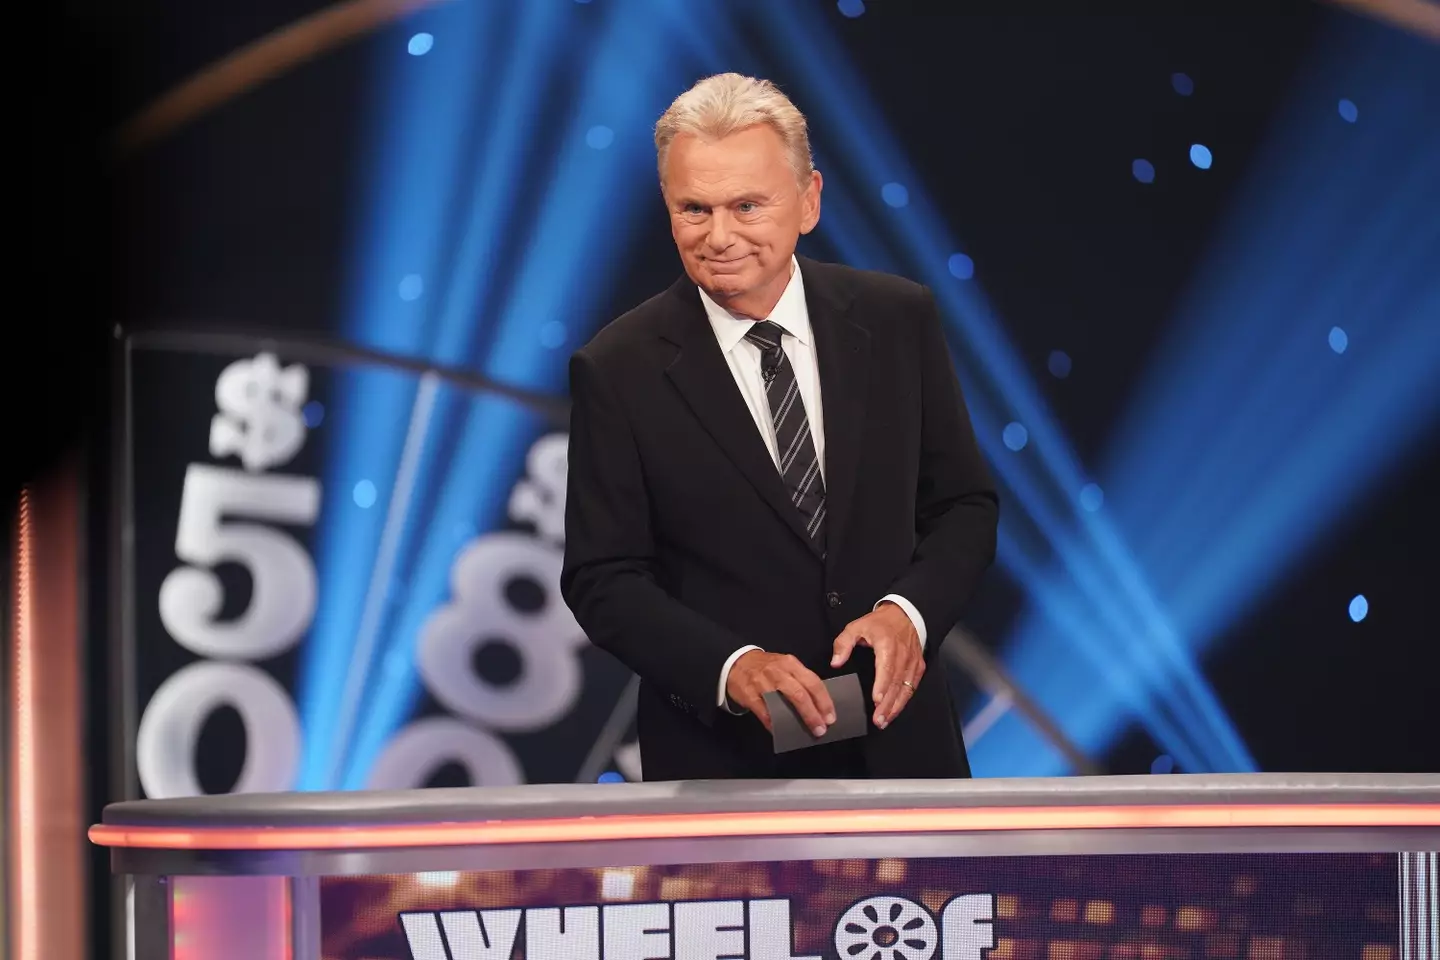 Pat Sajak is retiring from Wheel of Fortune.